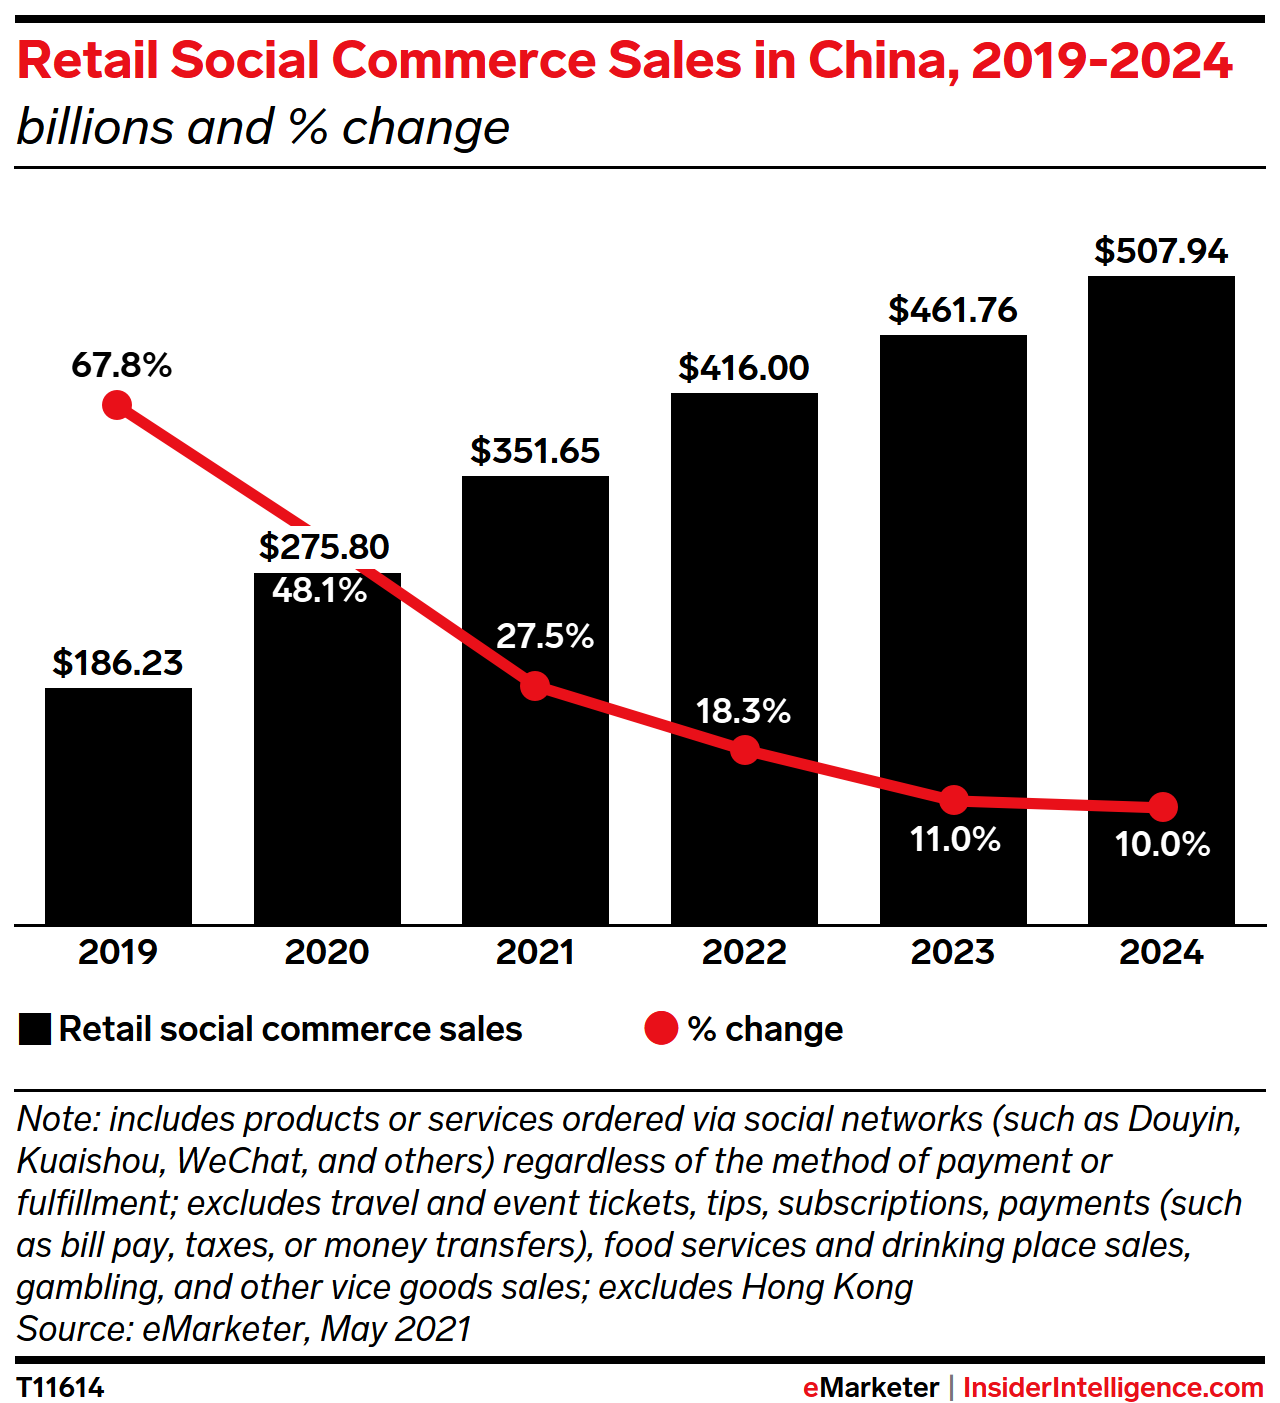 Retail Social Commerce Sales in China, 2019-2024 (billions and % change)